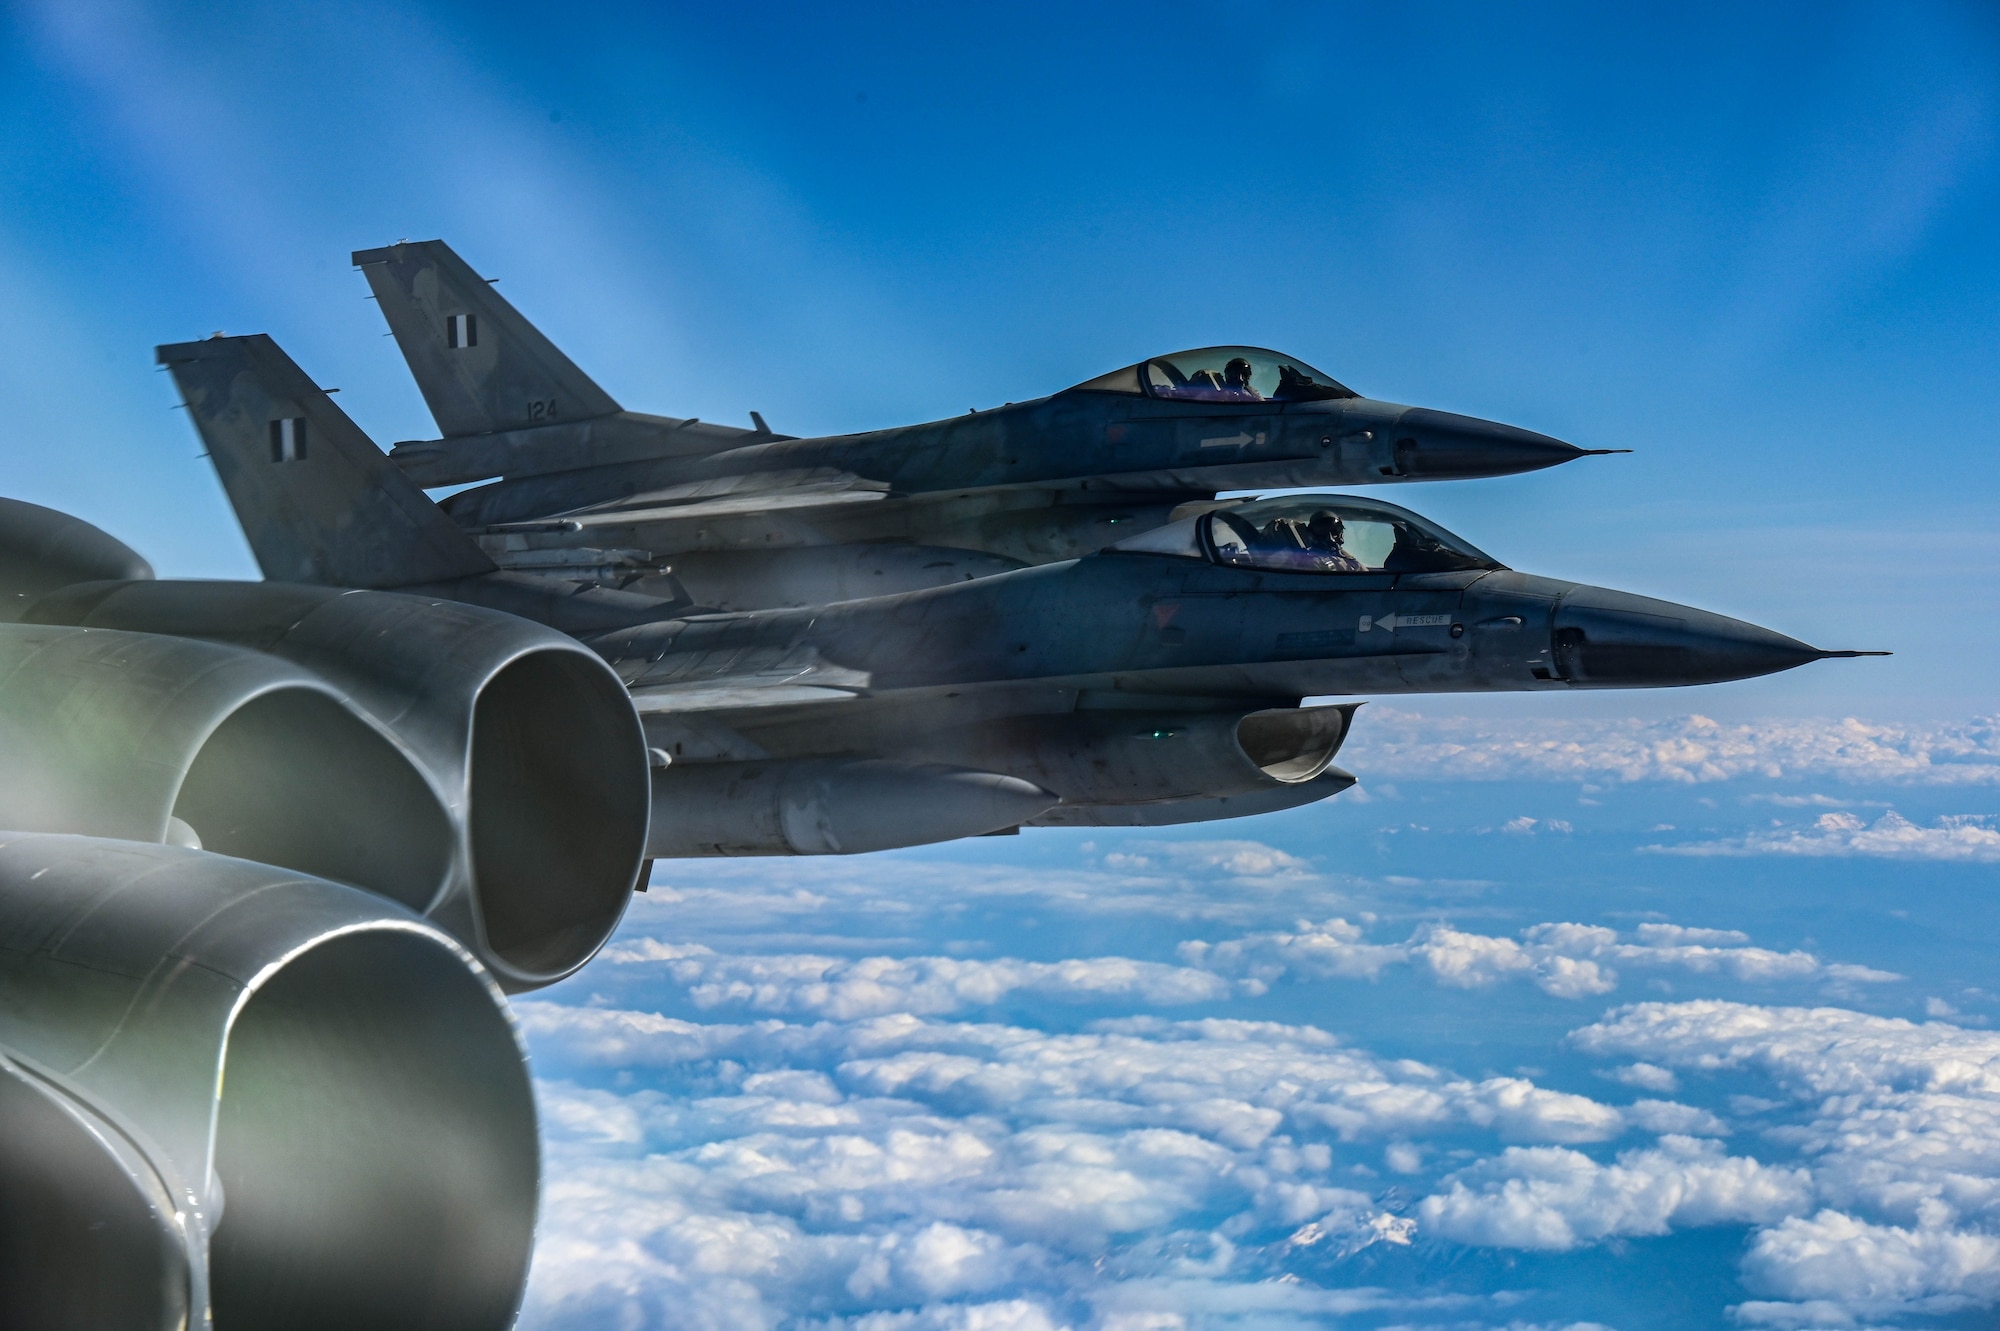 Two Hellenic Air Force F-16s fly in formation with a U.S. Air Force B-52H Stratofortress assigned to the 23rd Expeditionary Bomb Squadron during a Bomber Task Force mission in Greece, March 22, 2023. Bomber Task Force missions demonstrate the credibility of our forces to address a global security environment that is more diverse and uncertain than at any other time in recent history. (U.S. Air Force photo by Senior Airman Zachary Wright)